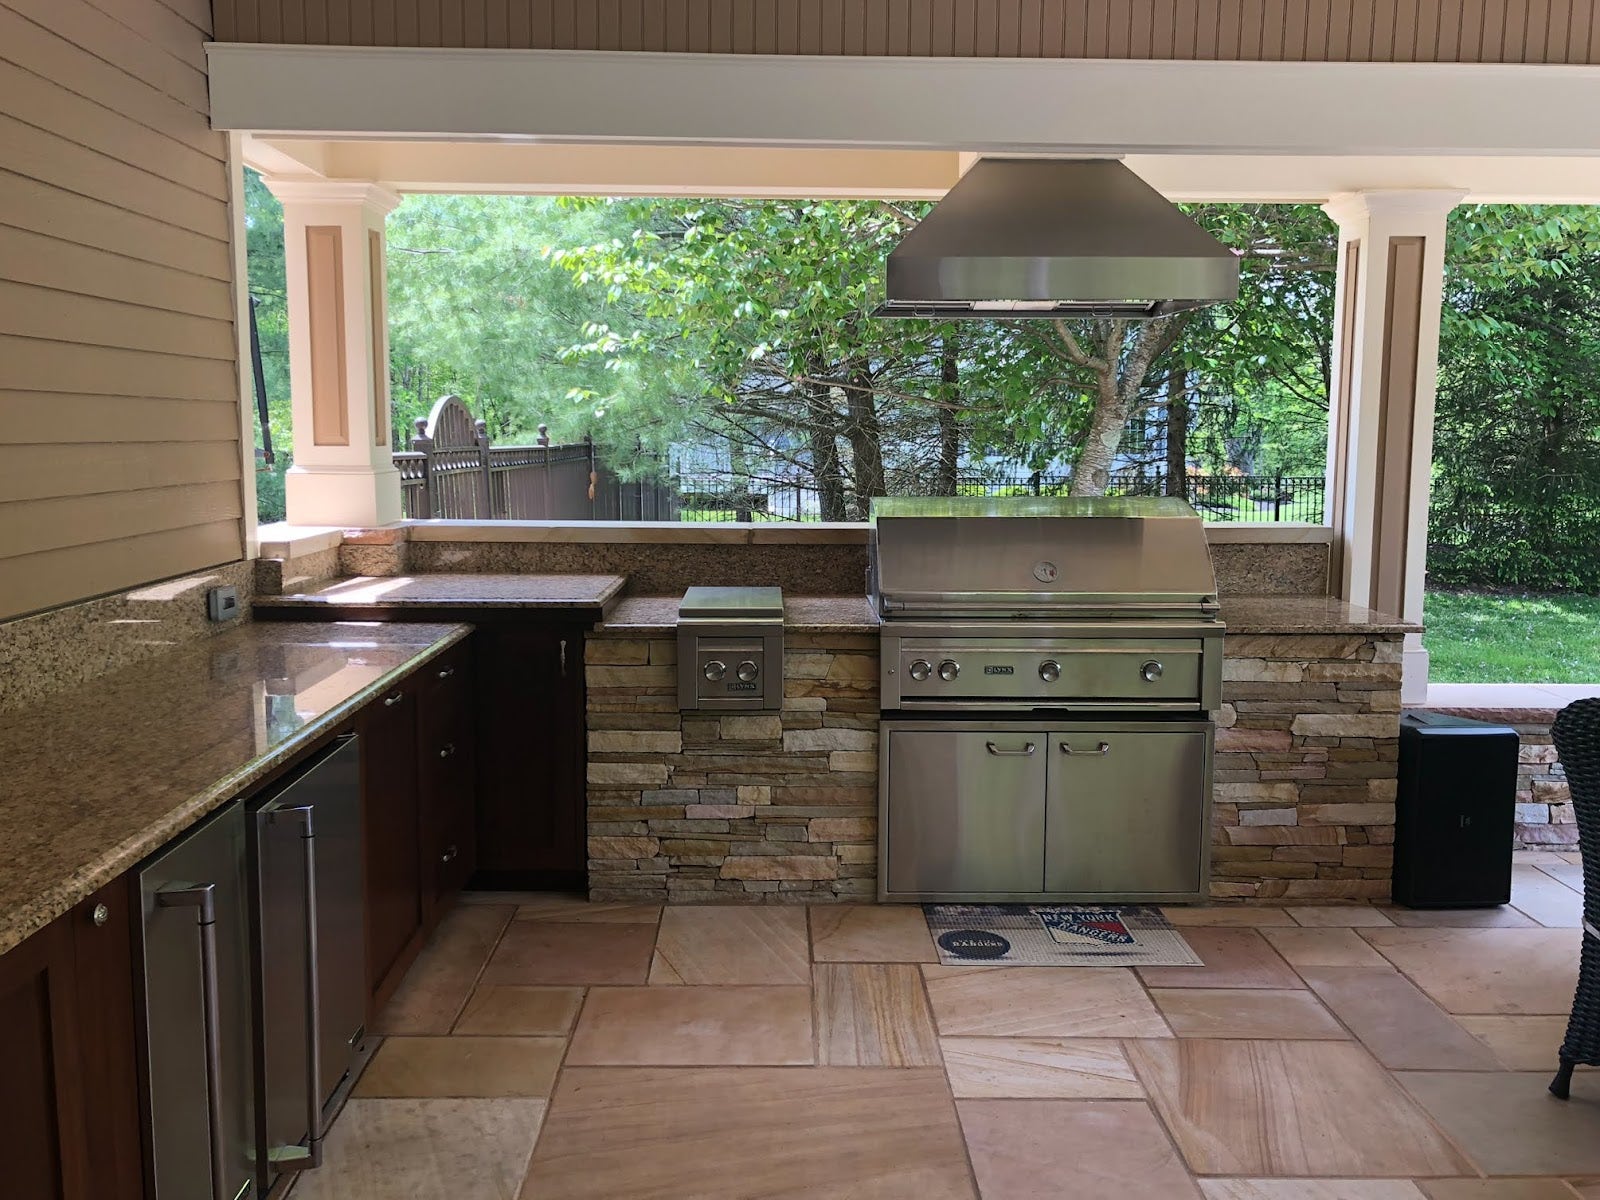 Covered patio kitchen featuring stone accents, modern appliances, and expansive counter space in a serene backyard setting. - Proline Range Hoods - prolinerangehoods.com 